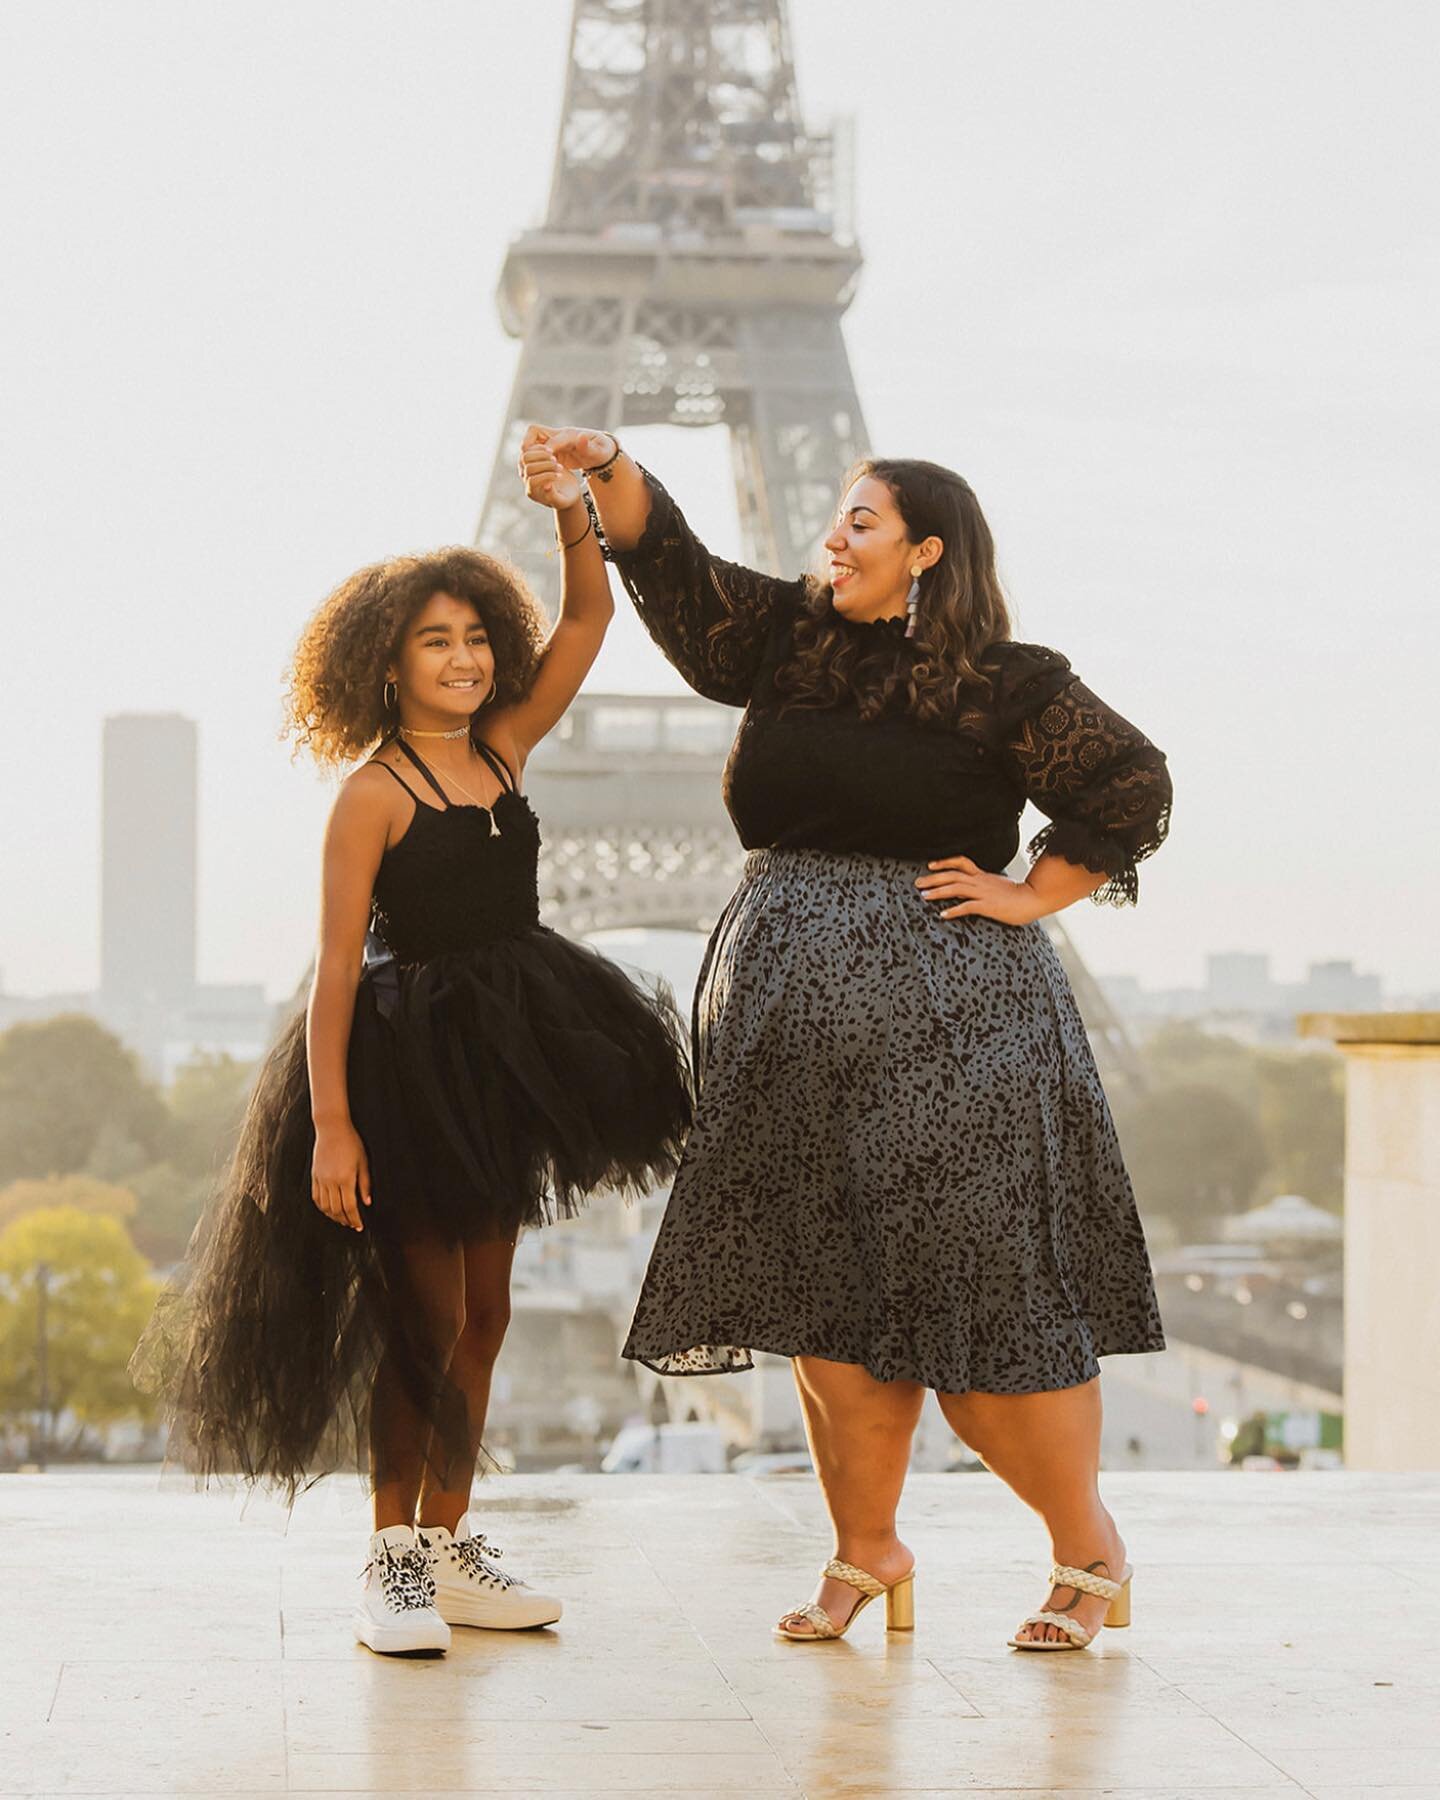 When the client asks for a photoshoot to be added to her itinerary, you make it happen!  In love with their shoot 😍@memoriesofparisphotos @missviirgiiinparis